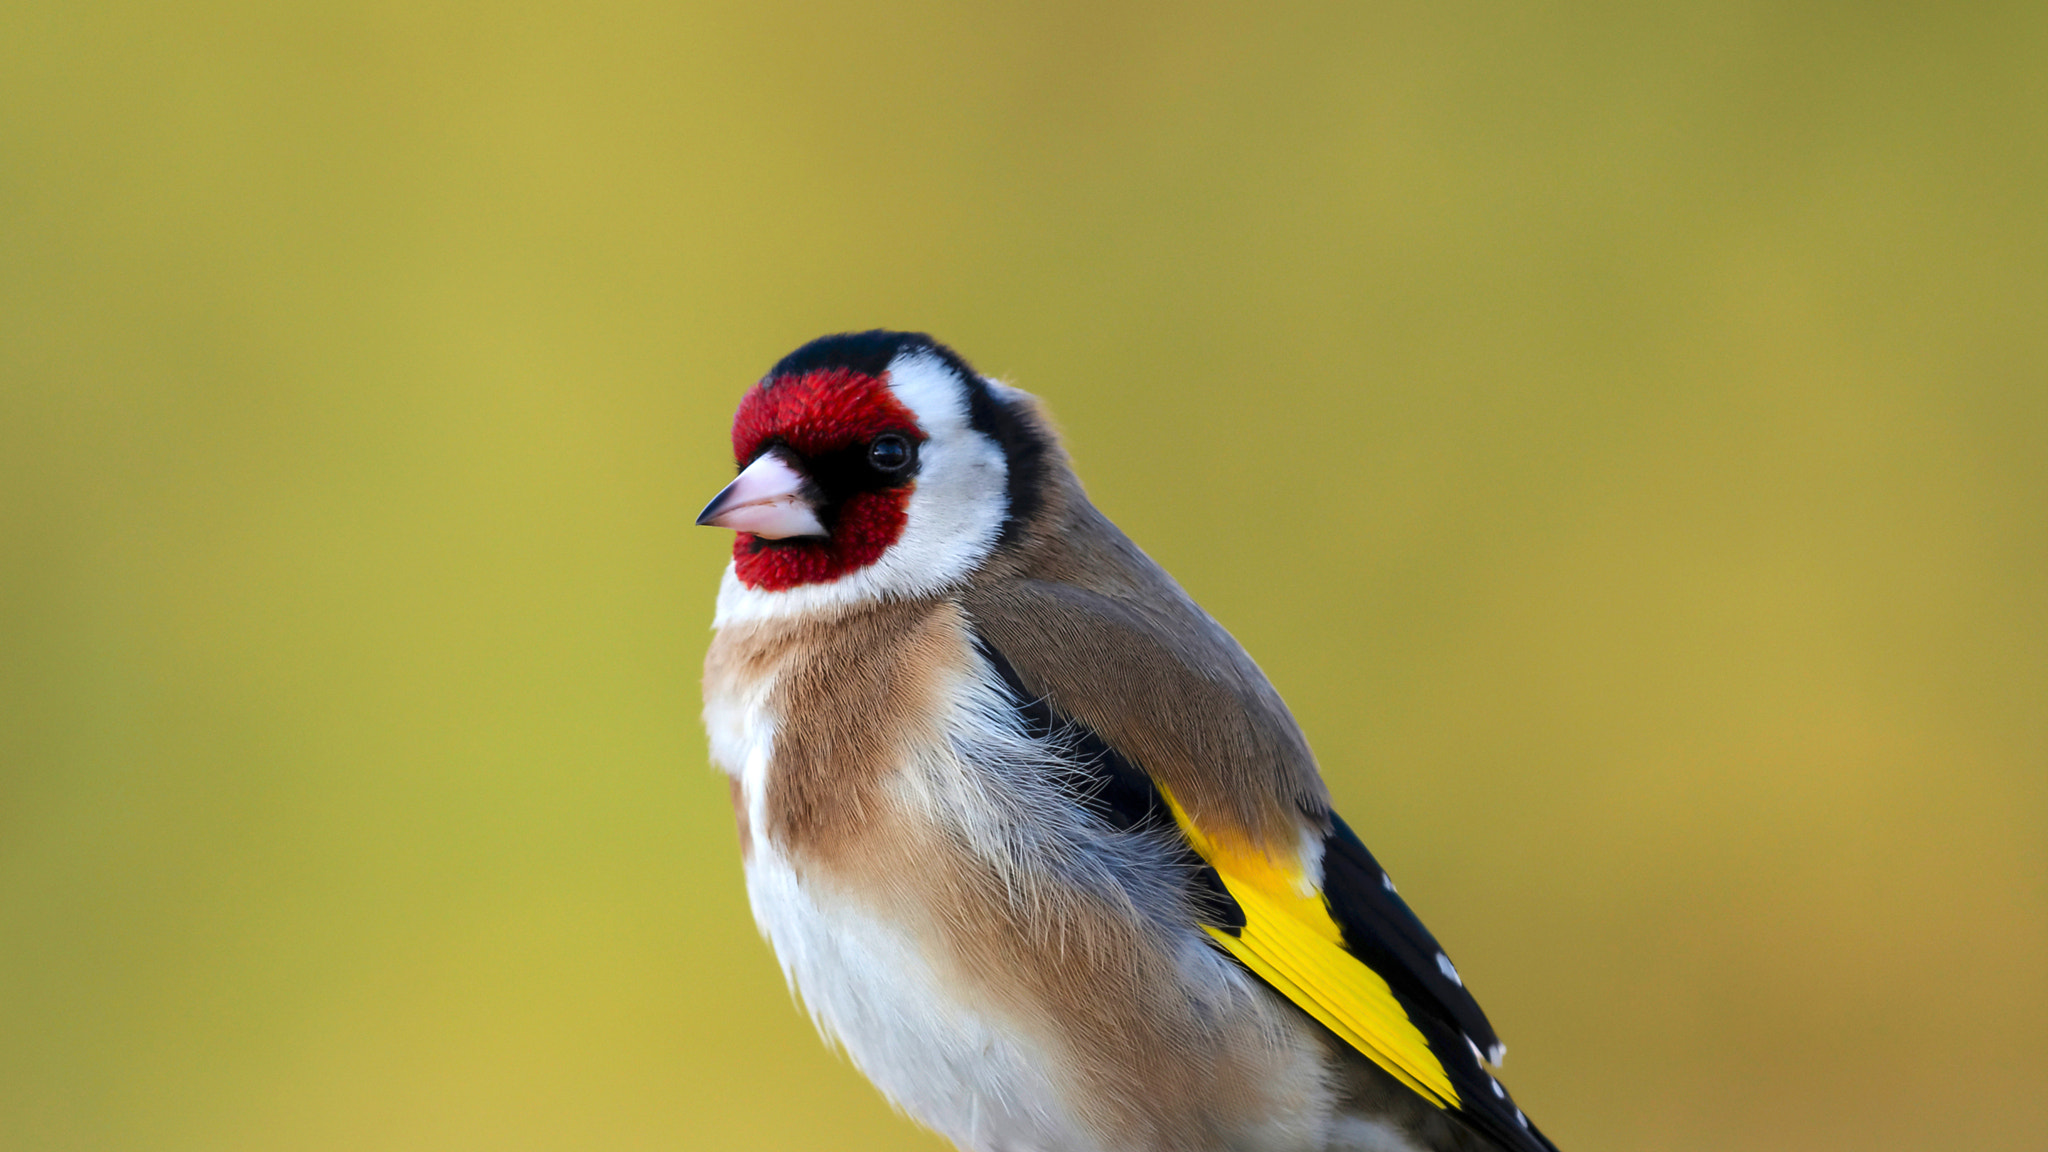 Nikon D800 sample photo. The goldfinch photography